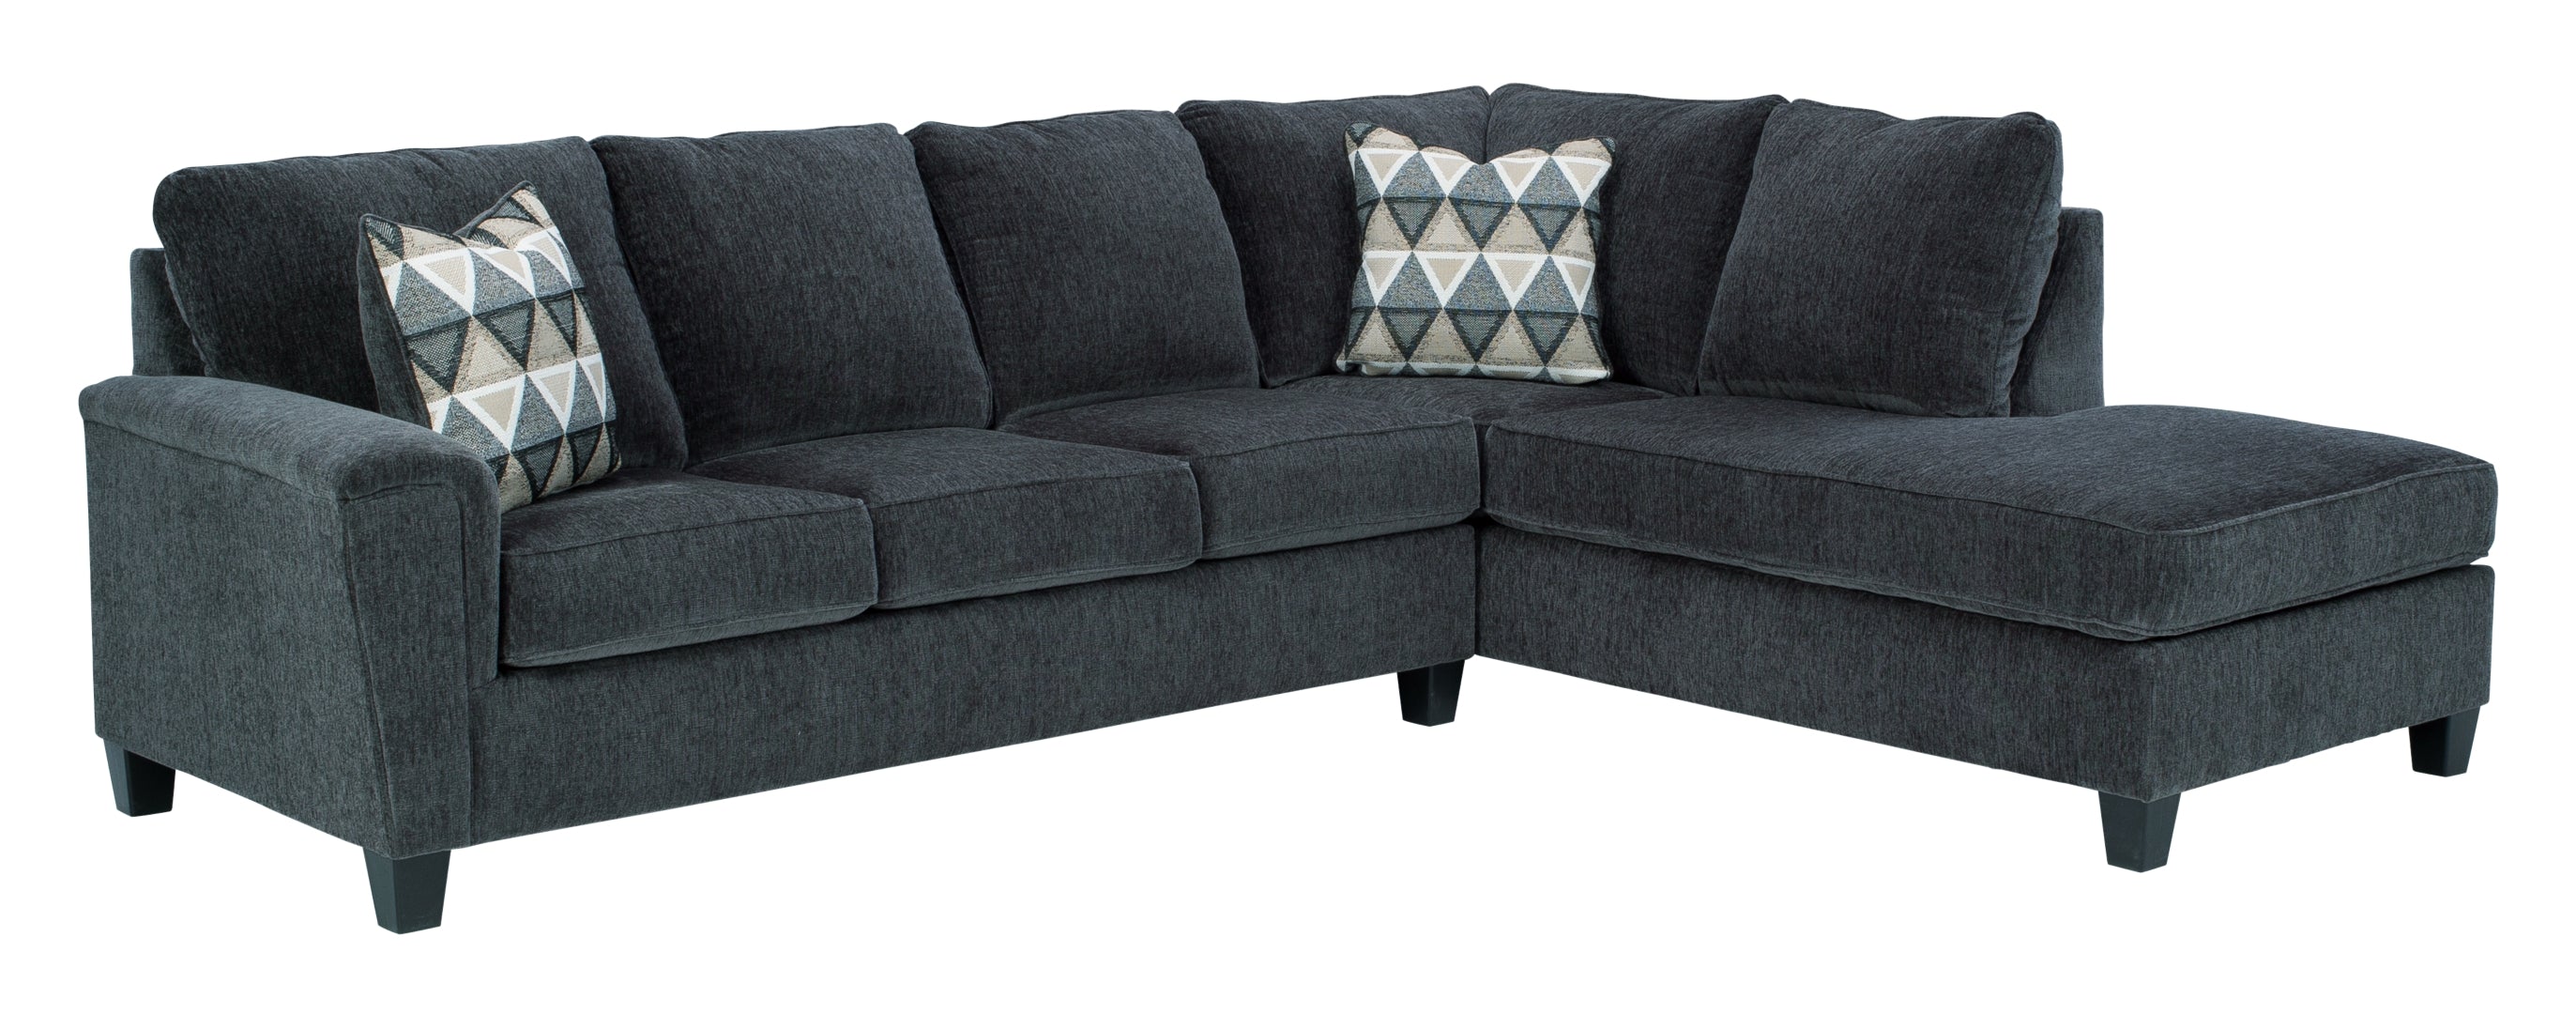 Abinger 2-Piece Sectional with Ottoman Ashley